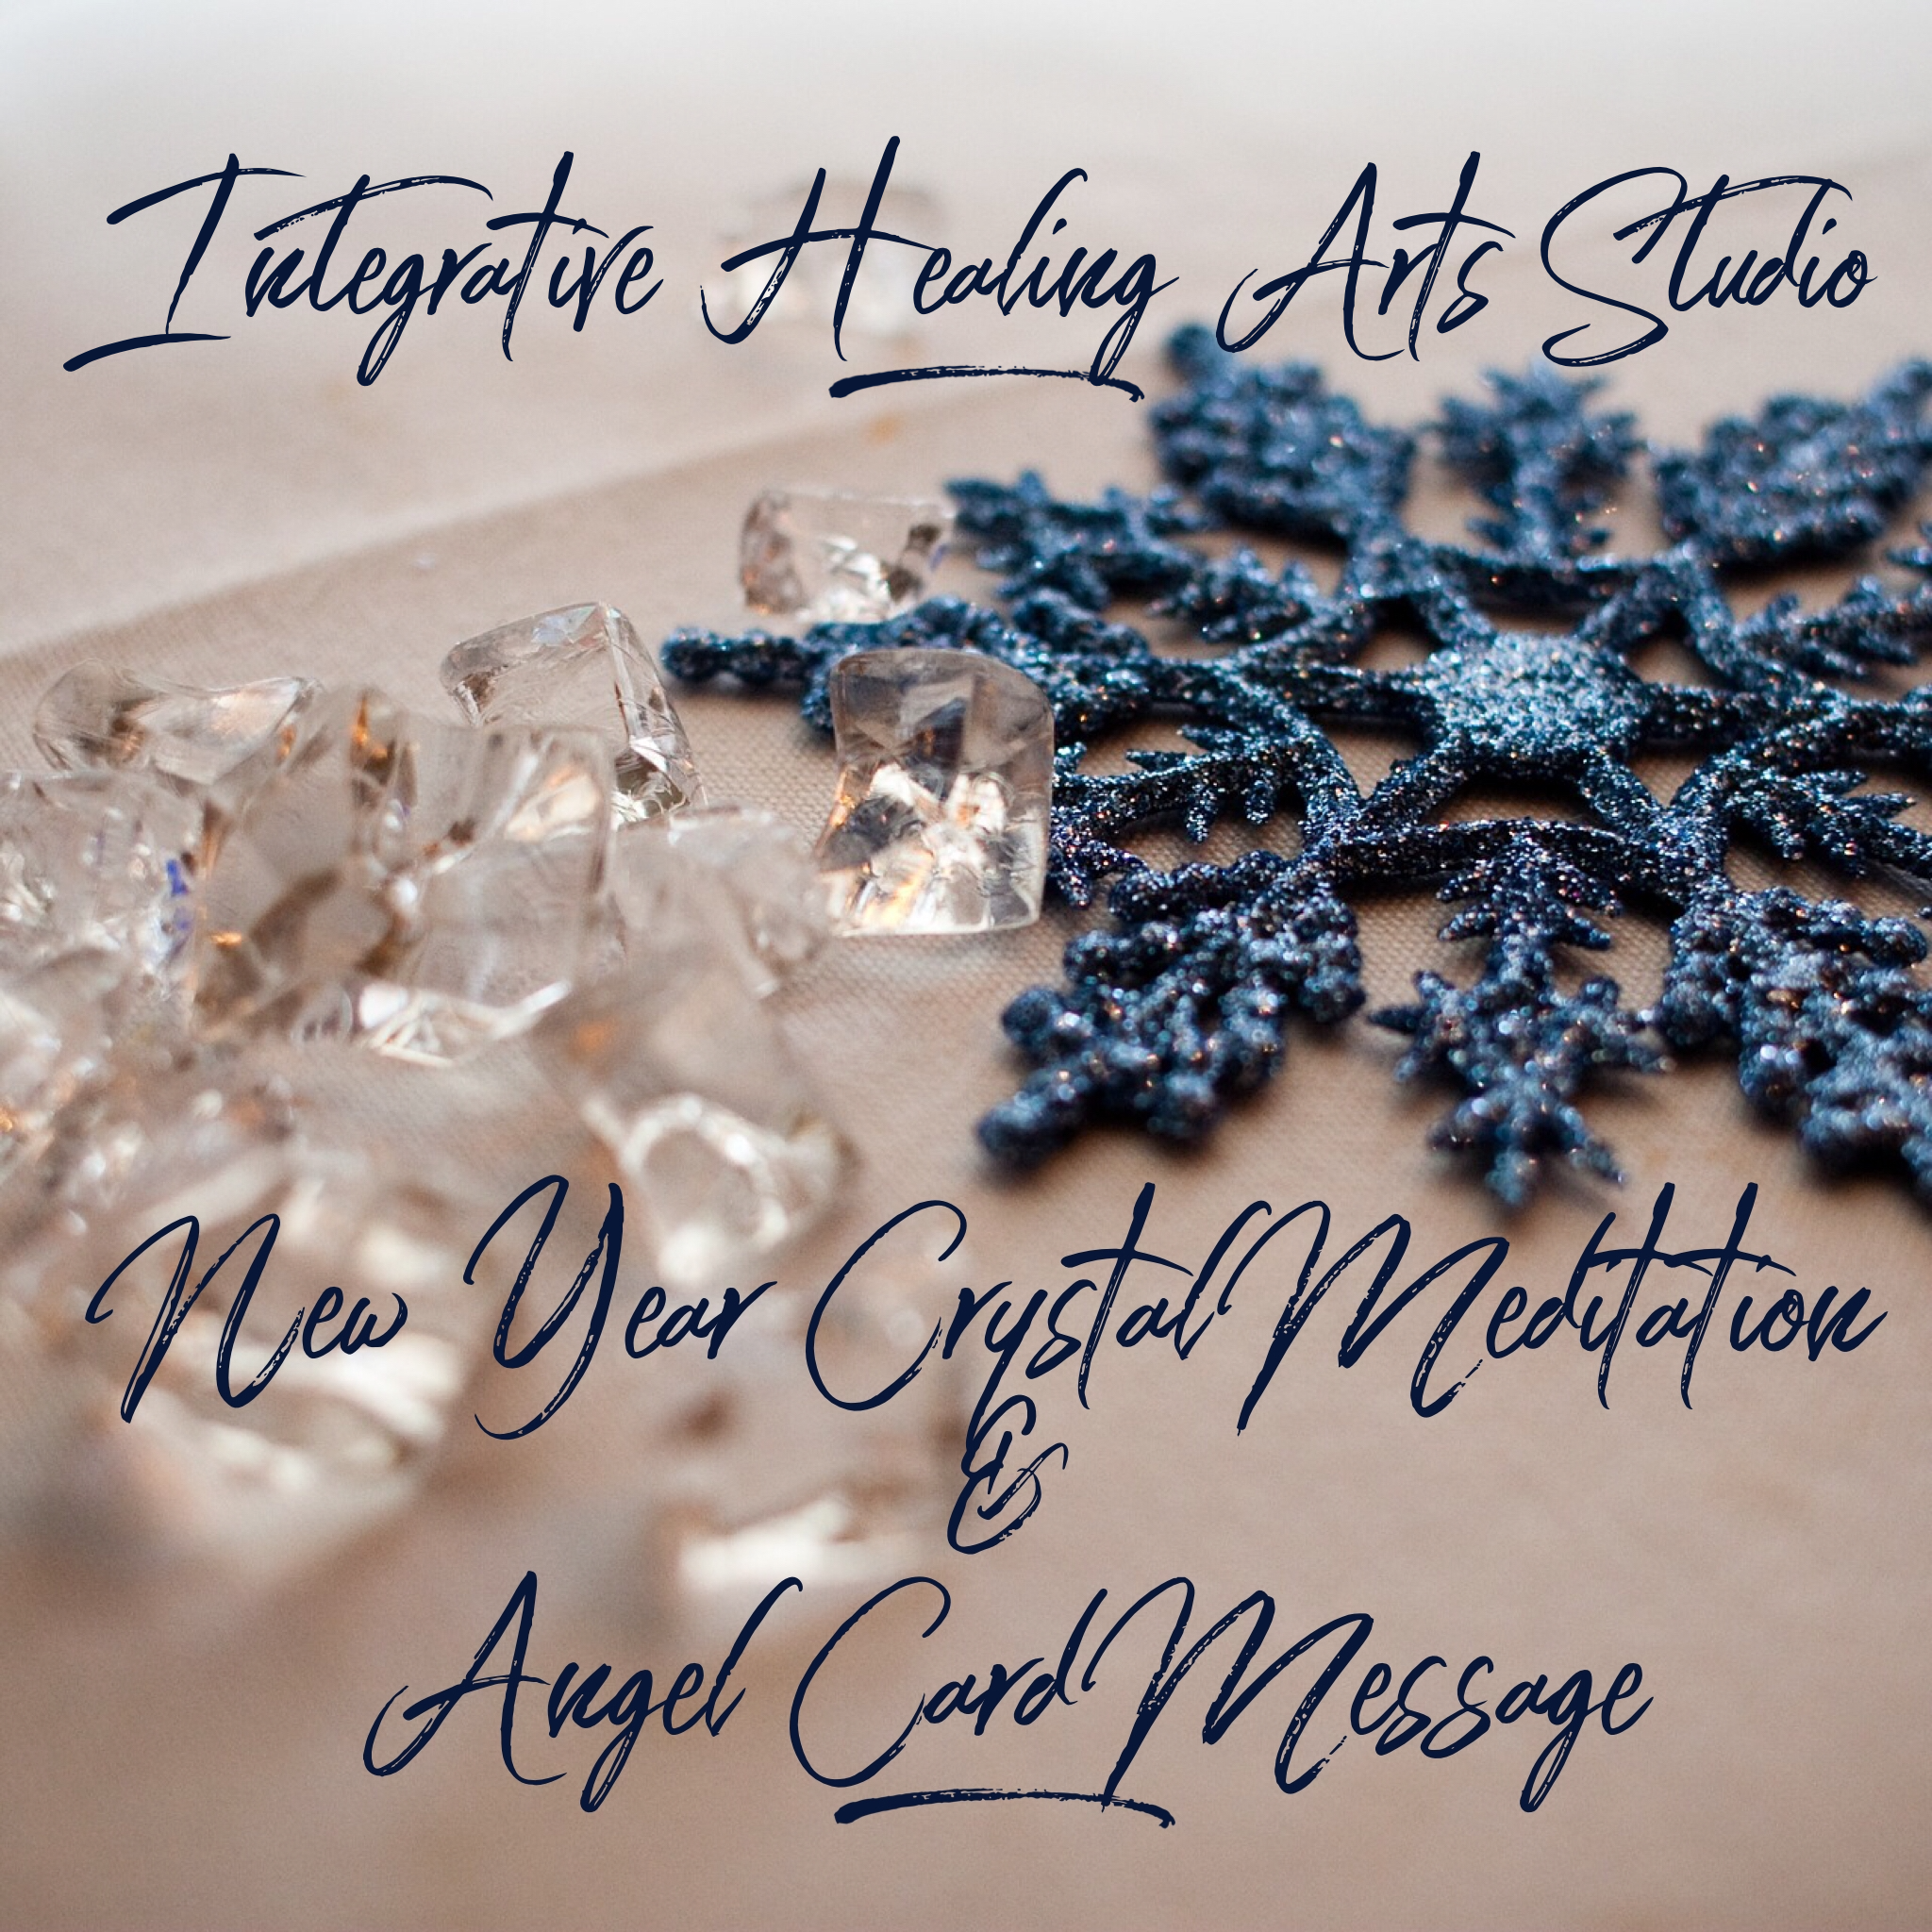 New Year Crystal Meditation and Angel Card Message Integrative Healing Arts Studio West Reading